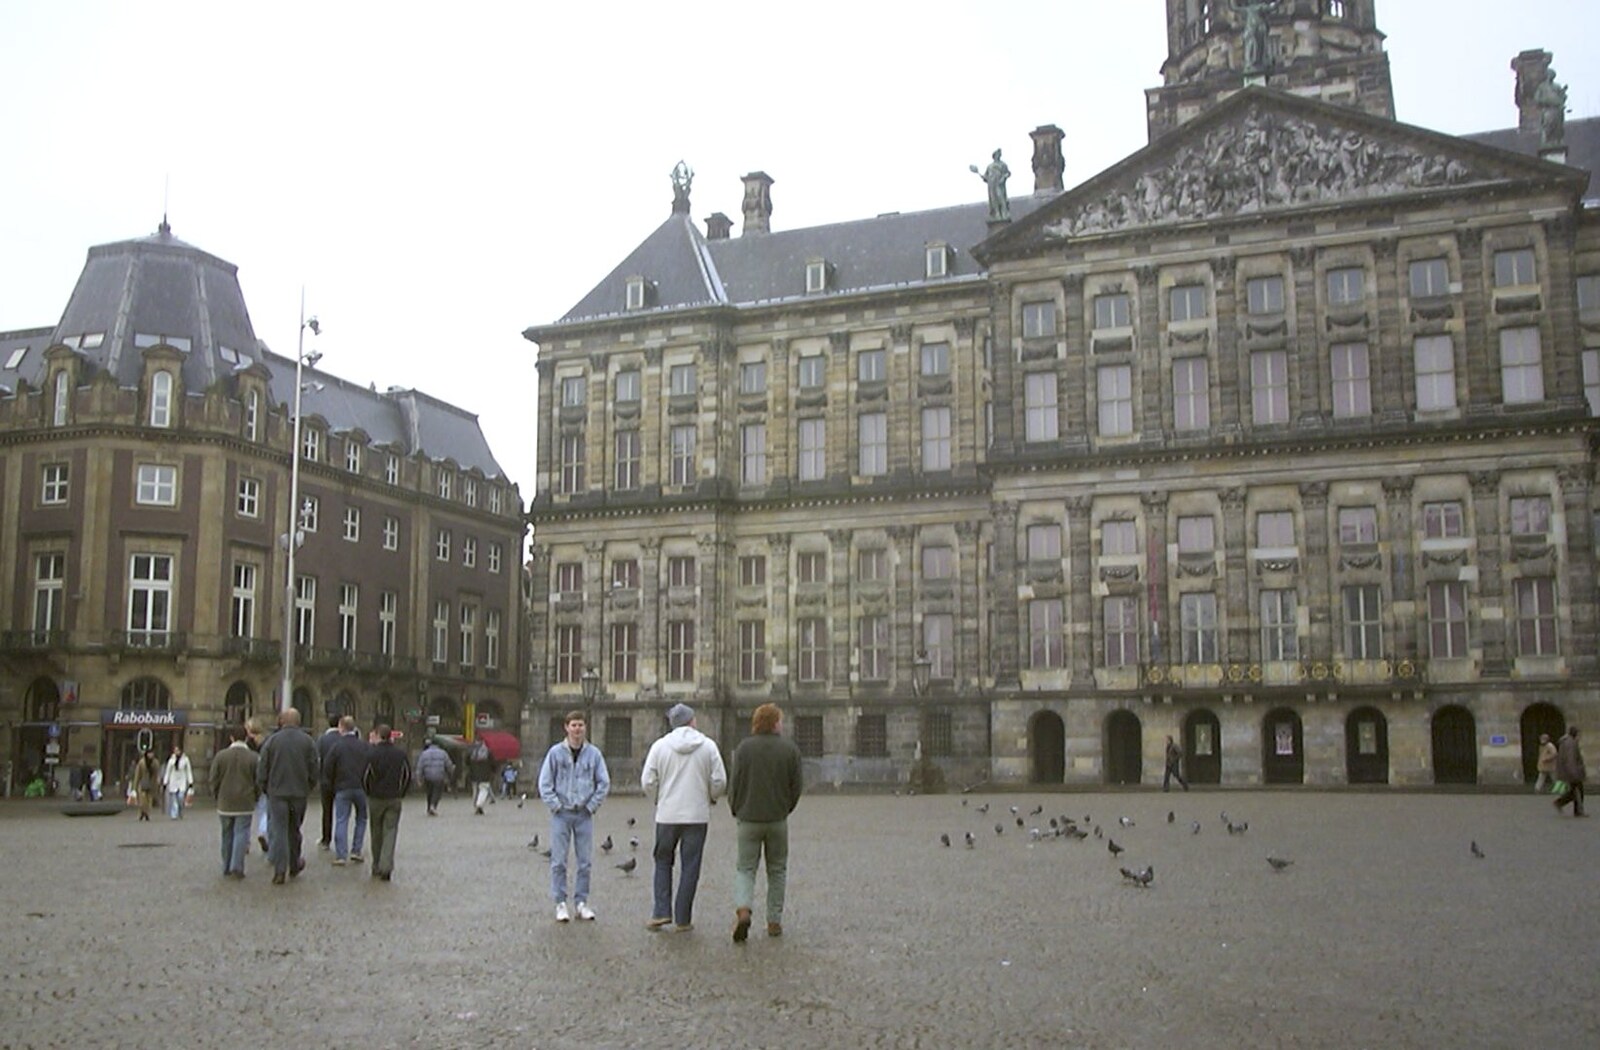 Crossing Dam square in front of Koninklijk Palace from Anne Frank, Markets and Mikey-P's Stag Do, Amsterdam, Netherlands - 6th March 2004